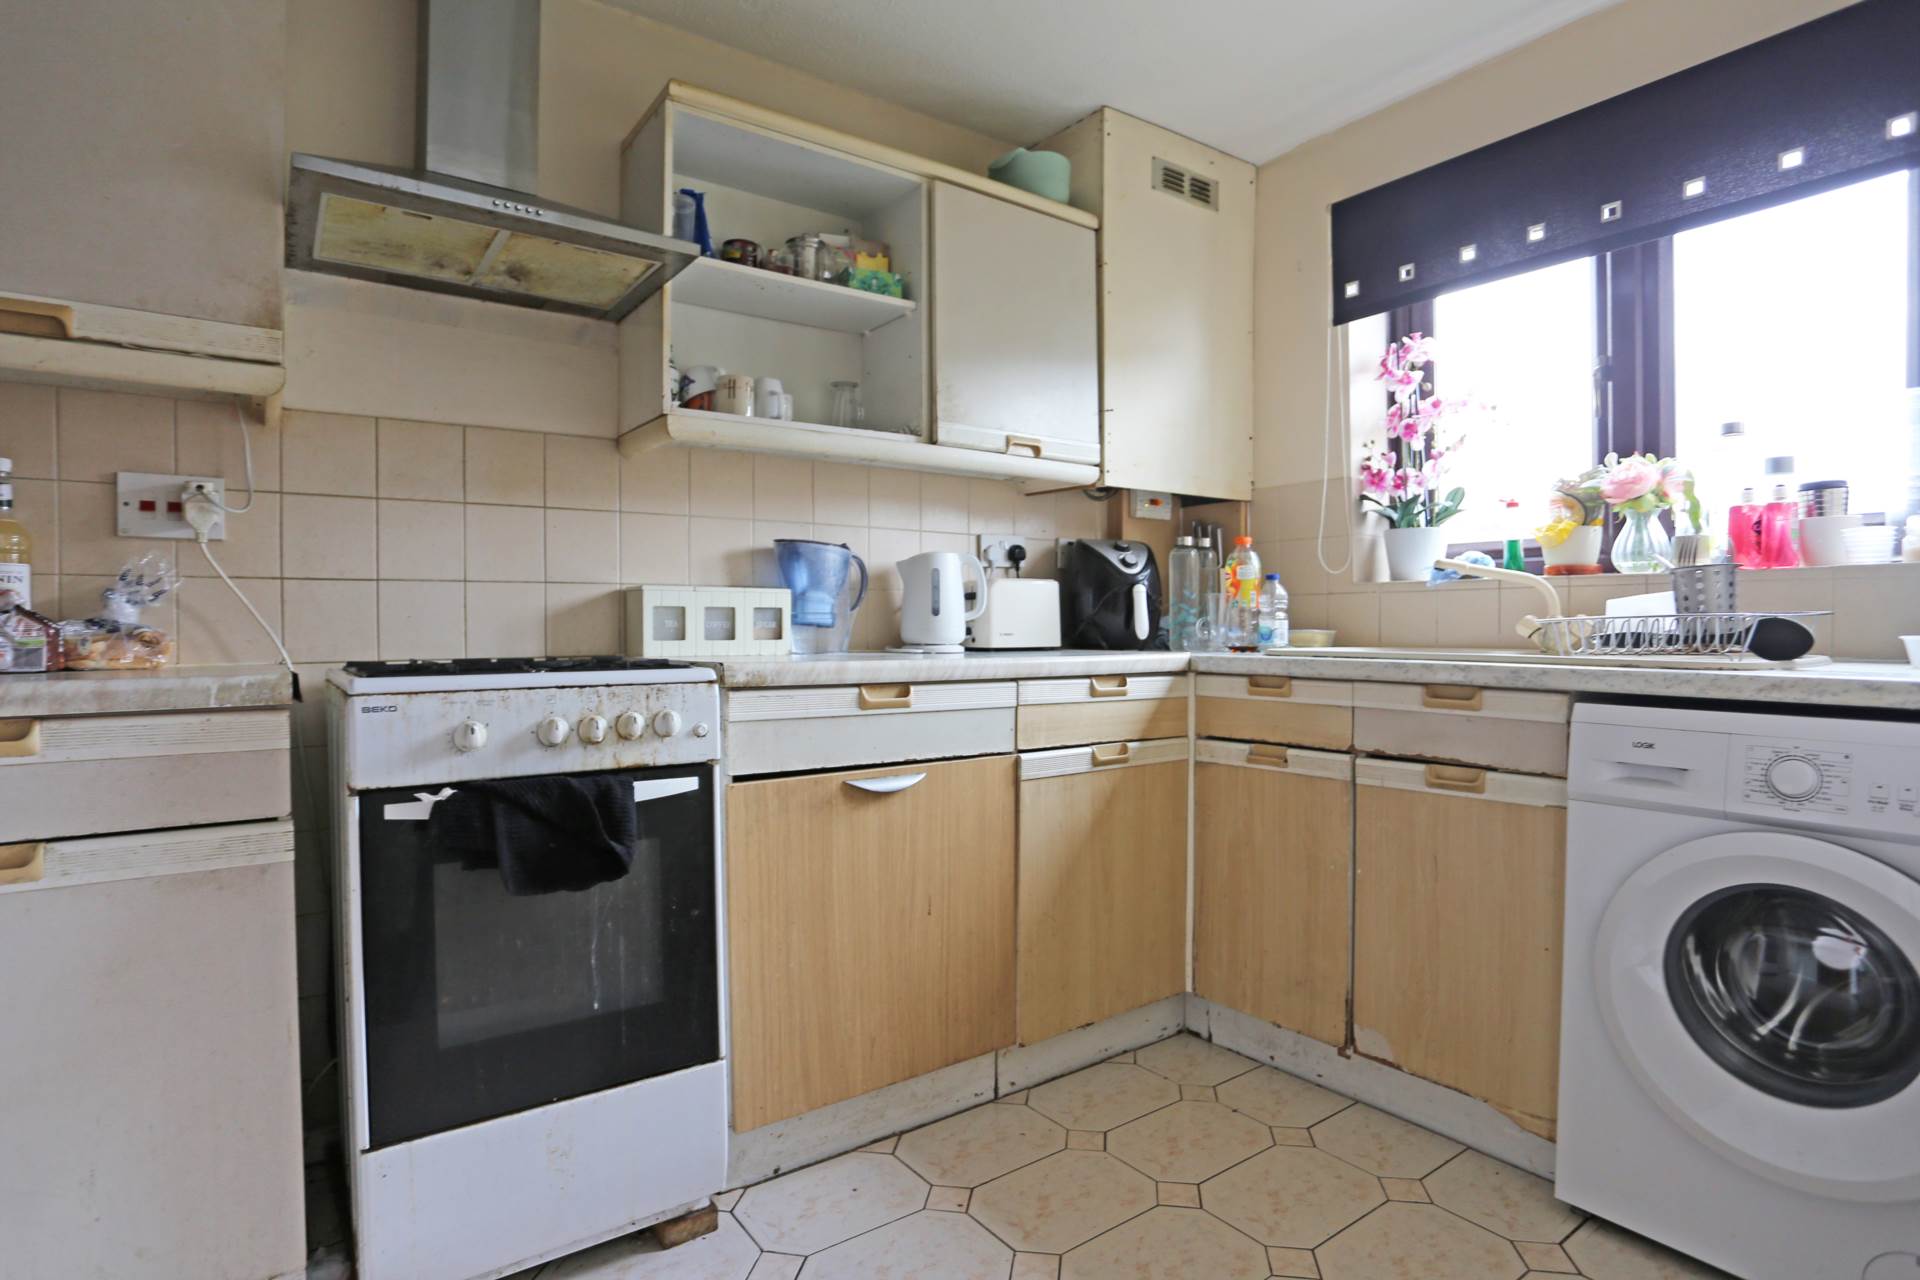 3 bed End Terraced House for rent in Dagenham. From Real Move Estates